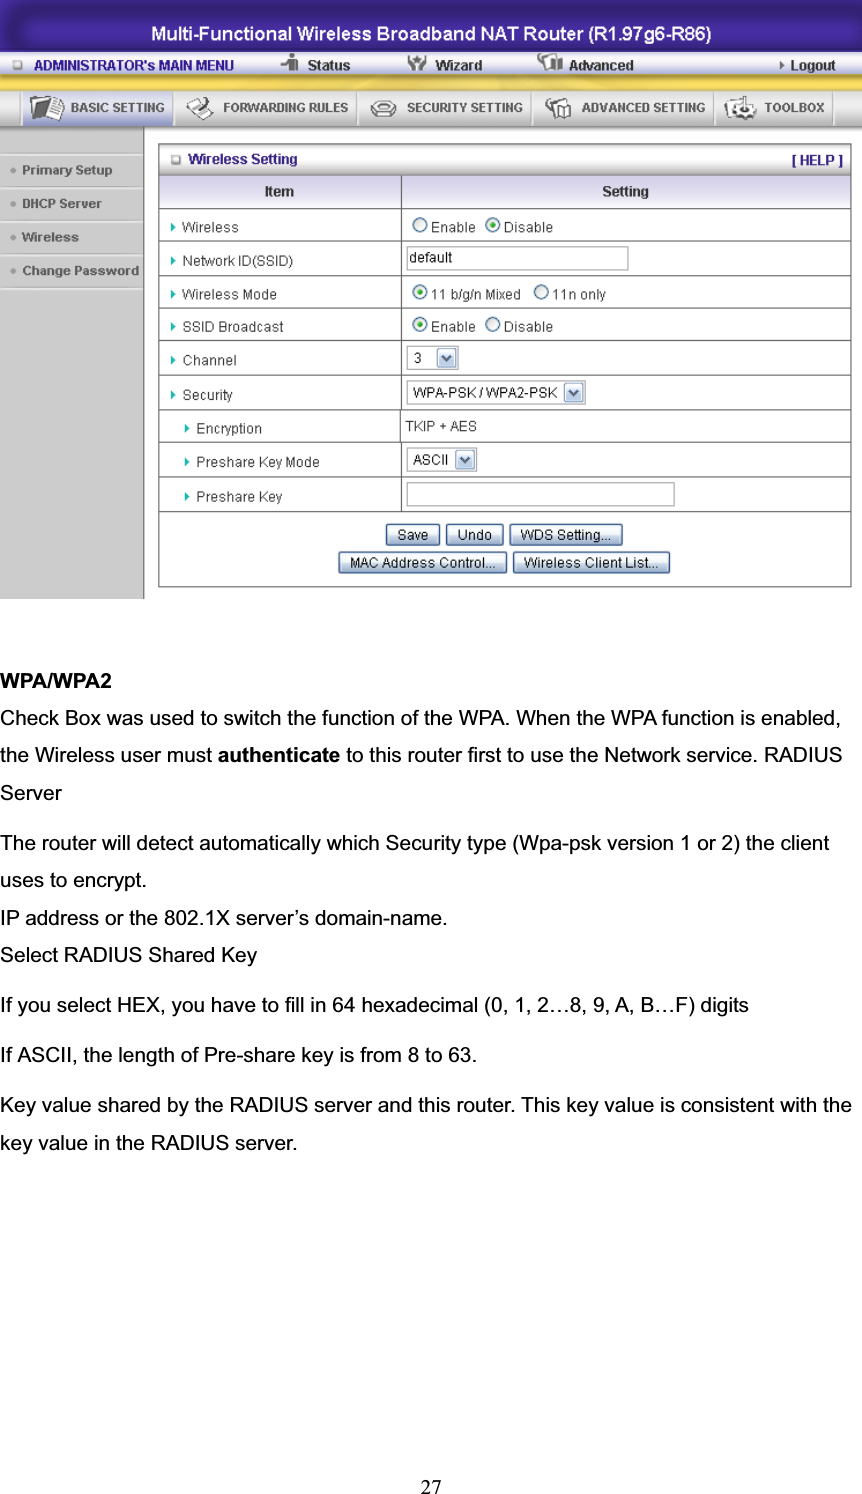 27WPA/WPA2 Check Box was used to switch the function of the WPA. When the WPA function is enabled, the Wireless user must authenticate to this router first to use the Network service. RADIUS ServerThe router will detect automatically which Security type (Wpa-psk version 1 or 2) the client uses to encrypt. IP address or the 802.1X server’s domain-name.   Select RADIUS Shared Key If you select HEX, you have to fill in 64 hexadecimal (0, 1, 2…8, 9, A, B…F) digits If ASCII, the length of Pre-share key is from 8 to 63. Key value shared by the RADIUS server and this router. This key value is consistent with the key value in the RADIUS server. 